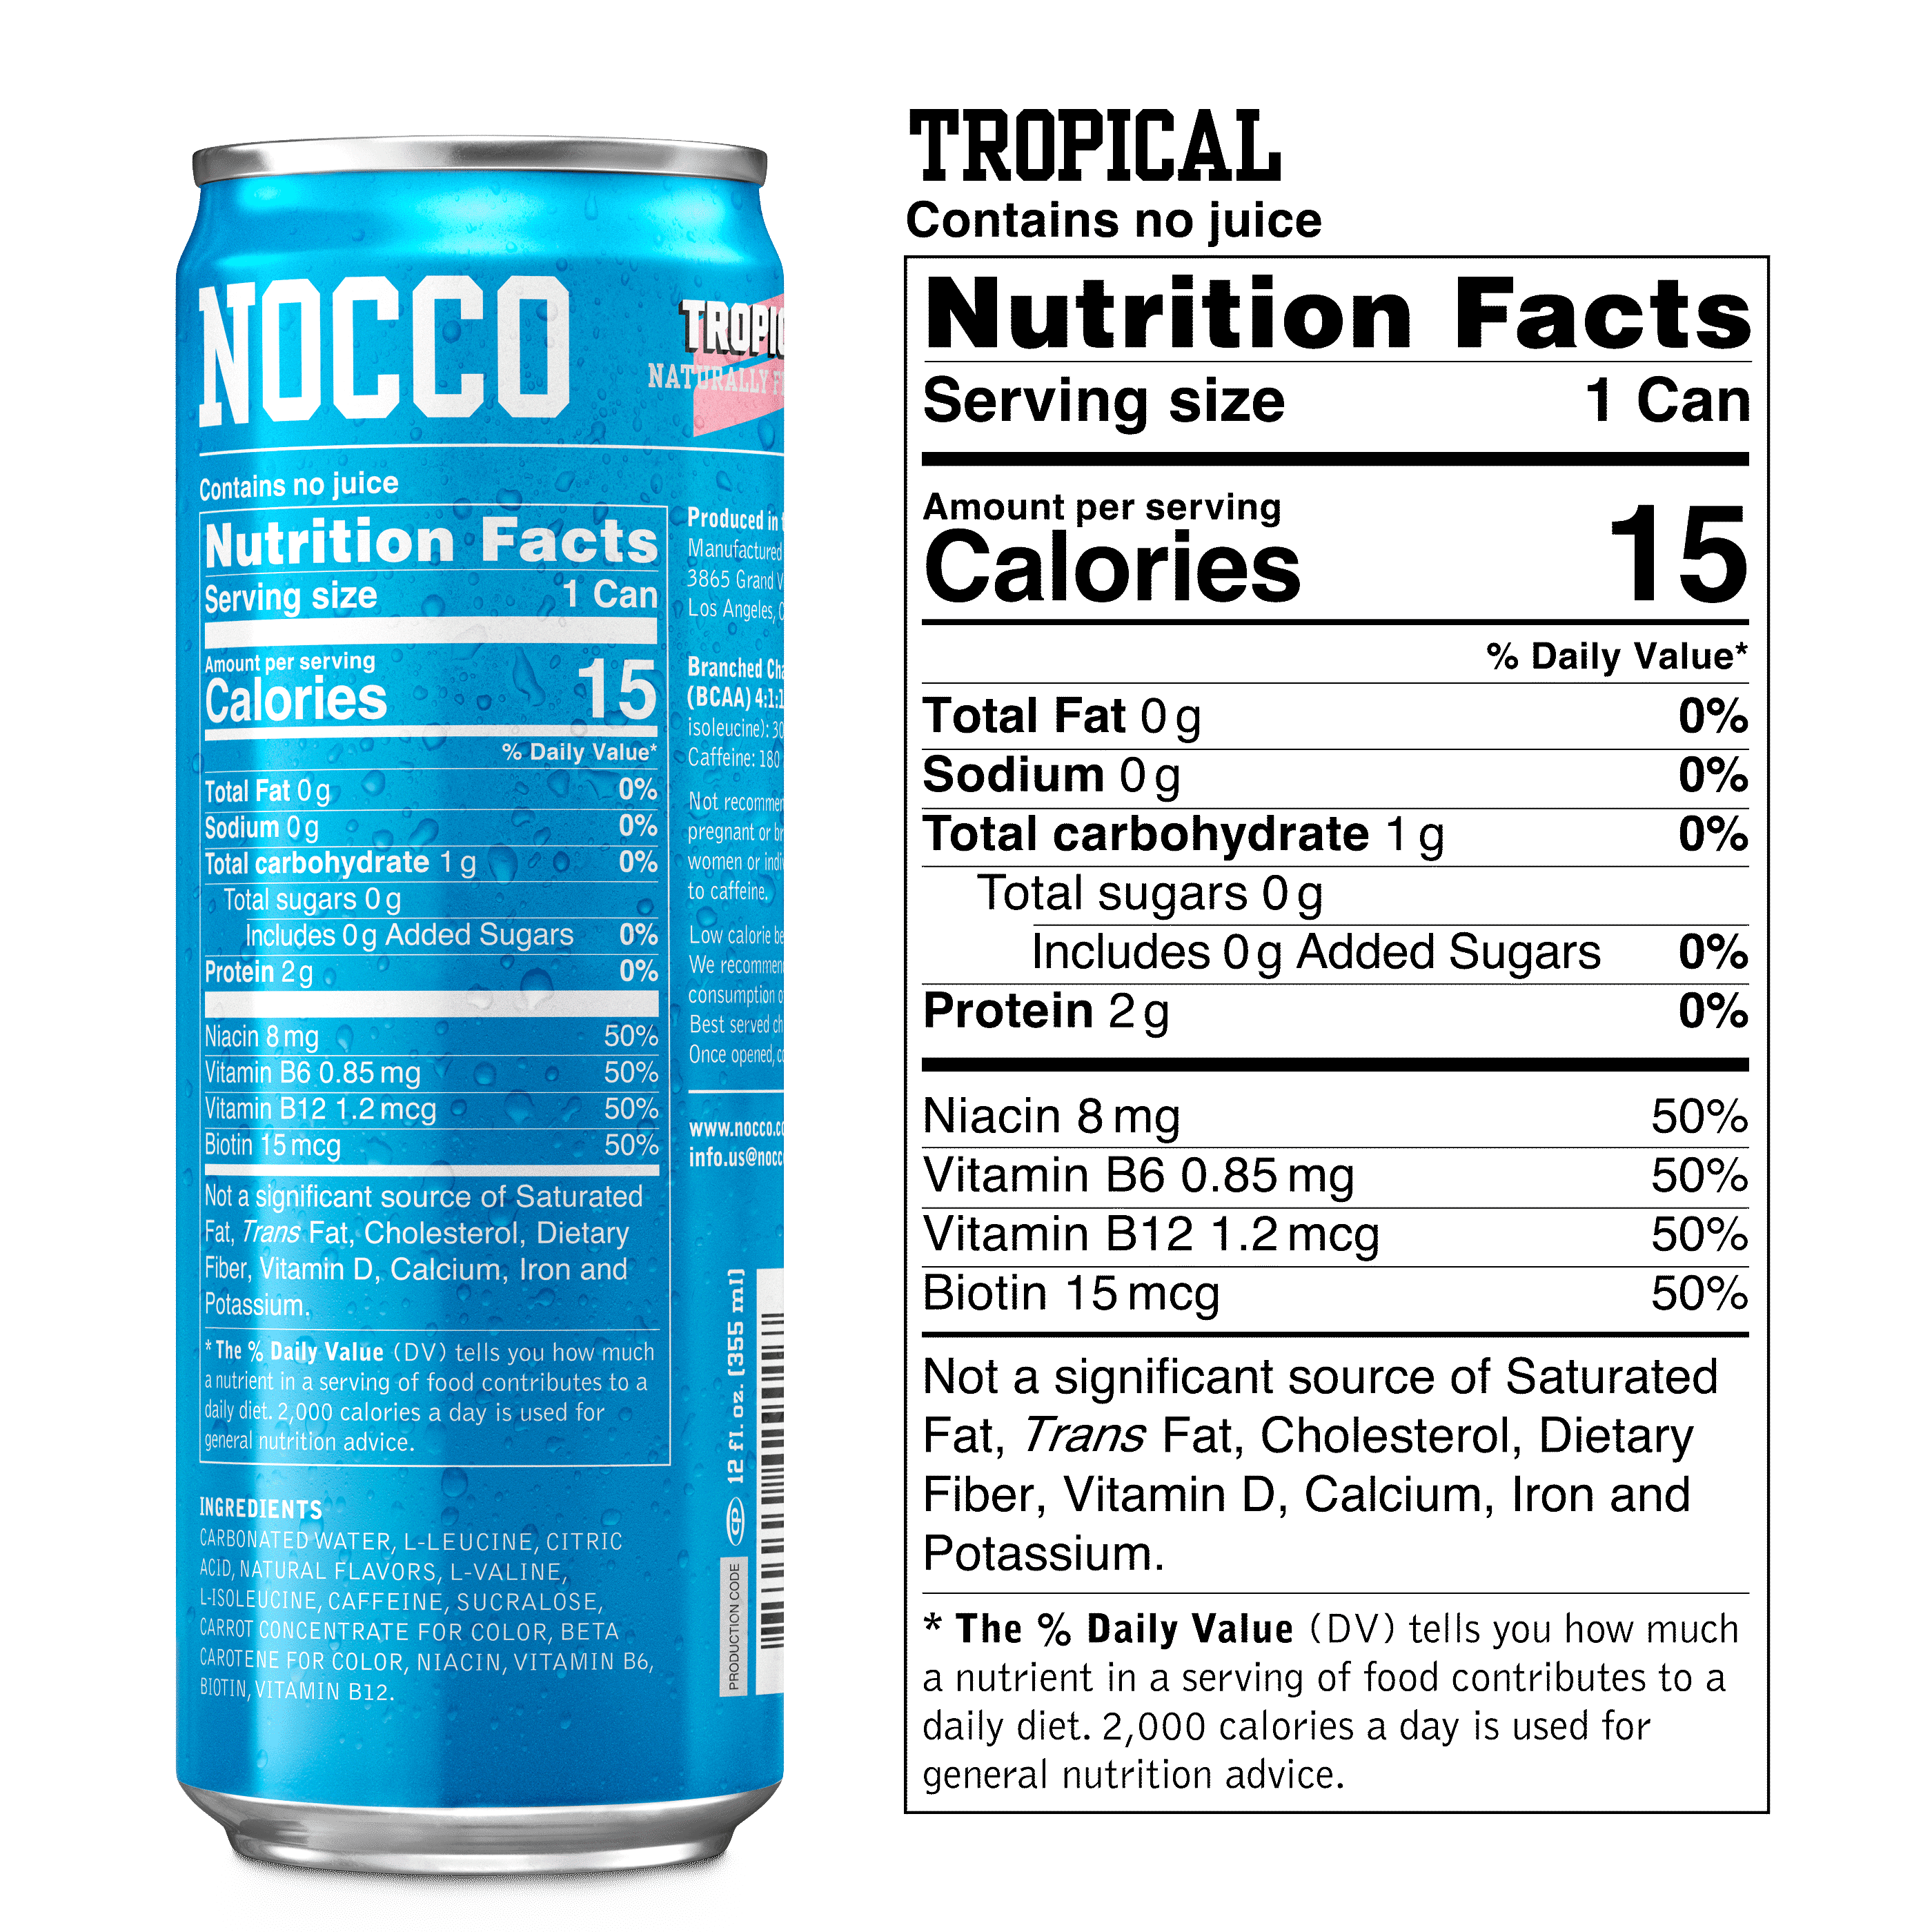 Tropical Nocco Nutrition Facts